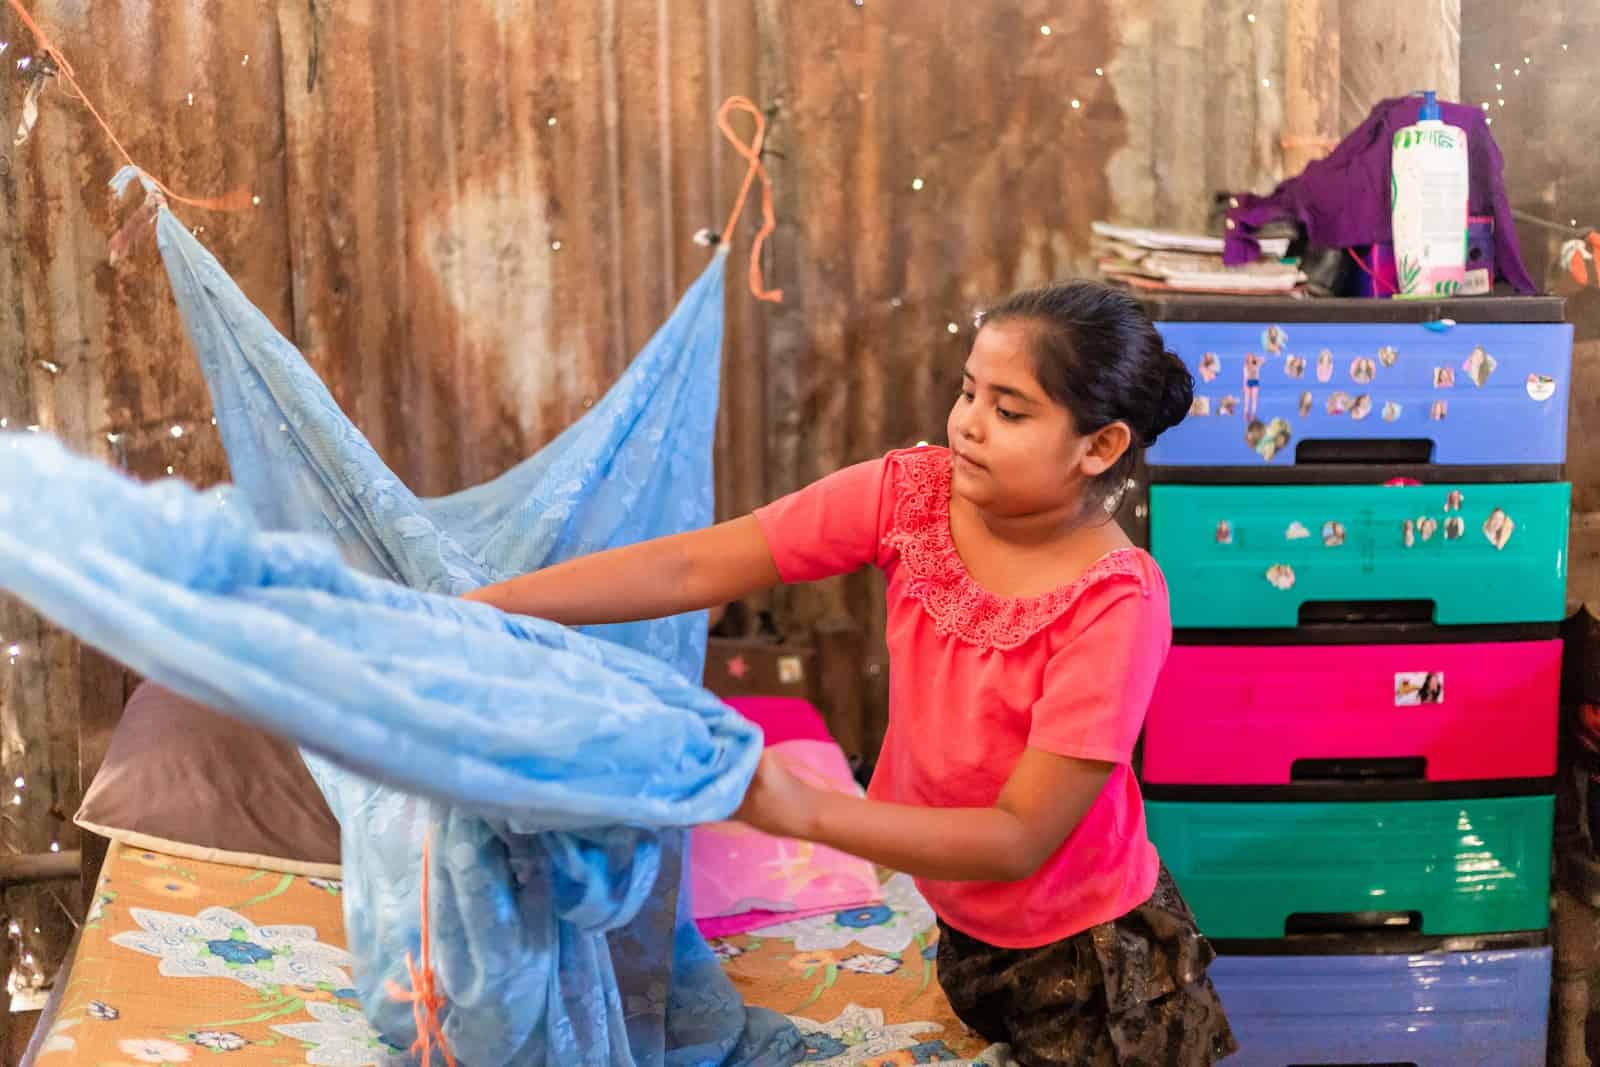 A girl in a pink shirt adjusts a mosquito net above a bed. There is a brightly colored plastic dresser in the background, in front of worn corrugated metal walls. 